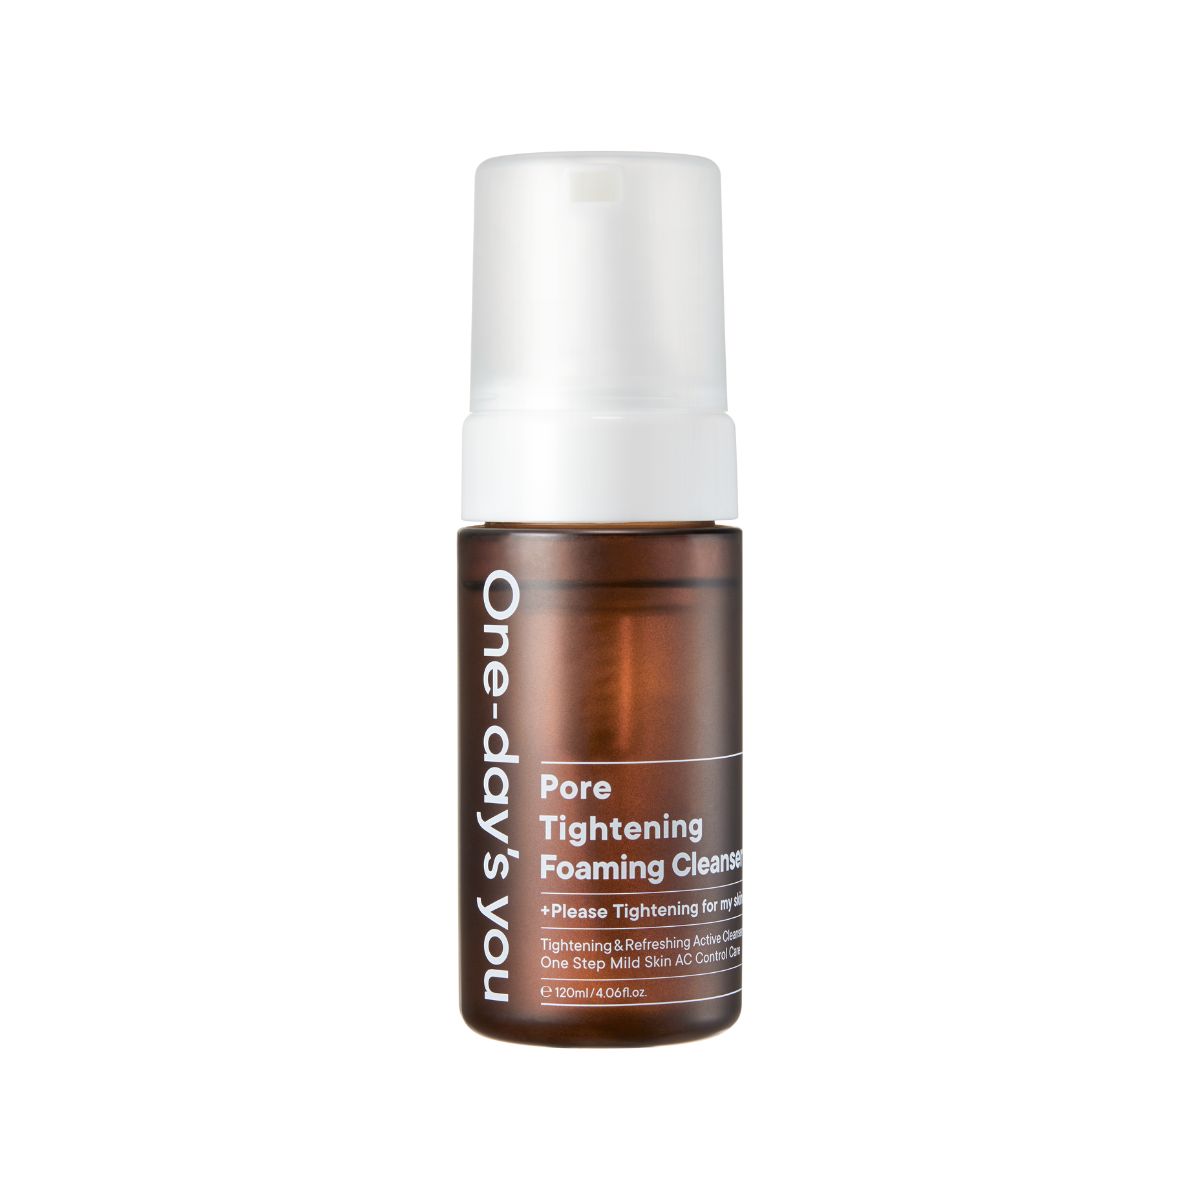 PORE TIGHTENING FOAMING CLEANSER